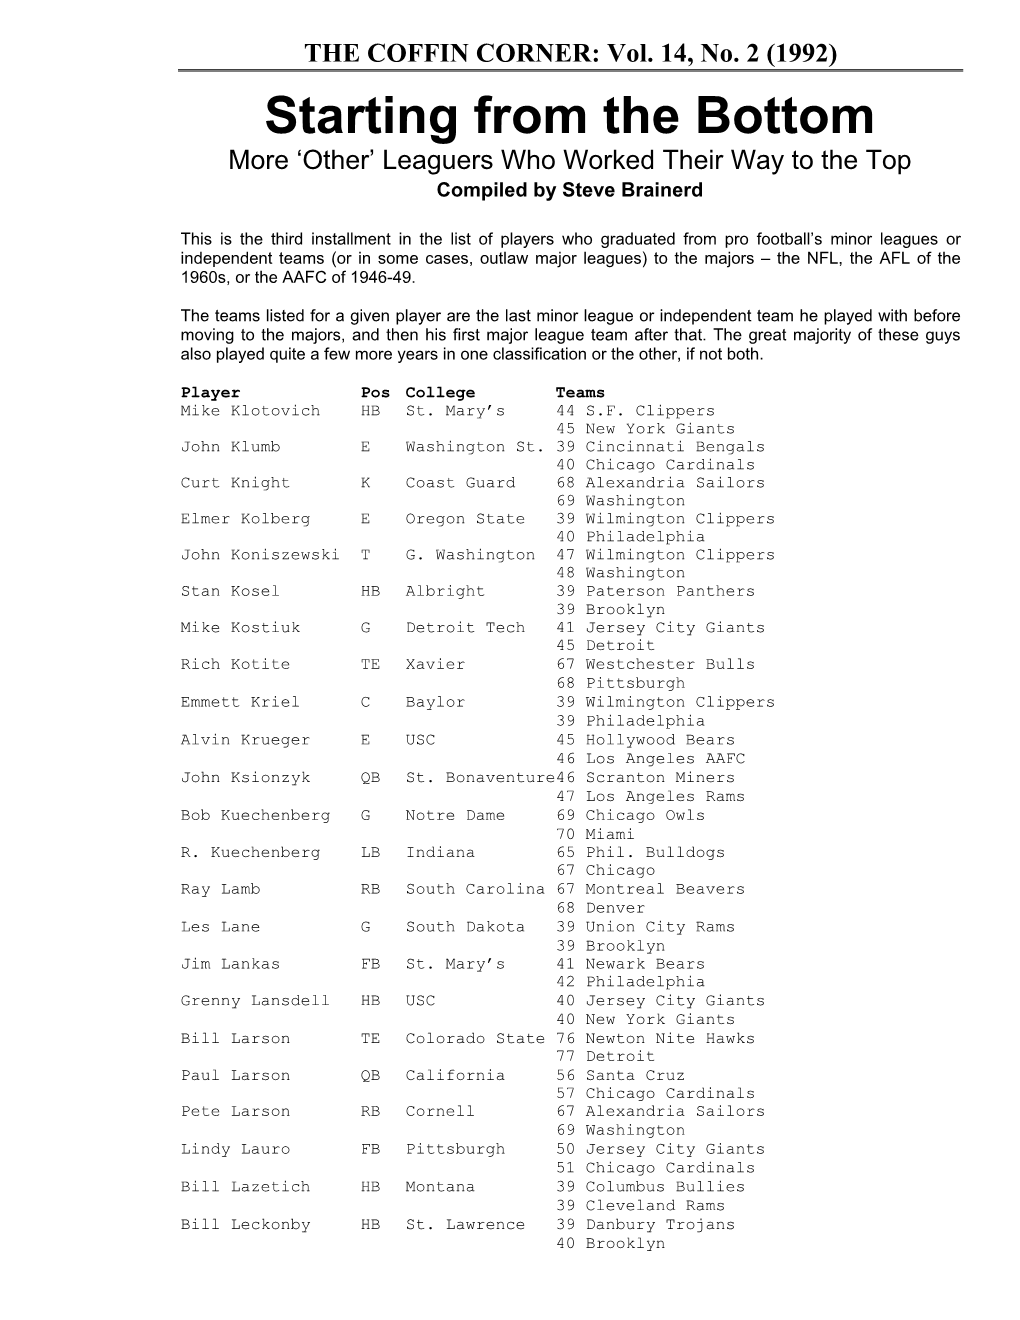 Vol. 14, No. 2 (1992) Starting from the Bottom More ‘Other’ Leaguers Who Worked Their Way to the Top Compiled by Steve Brainerd